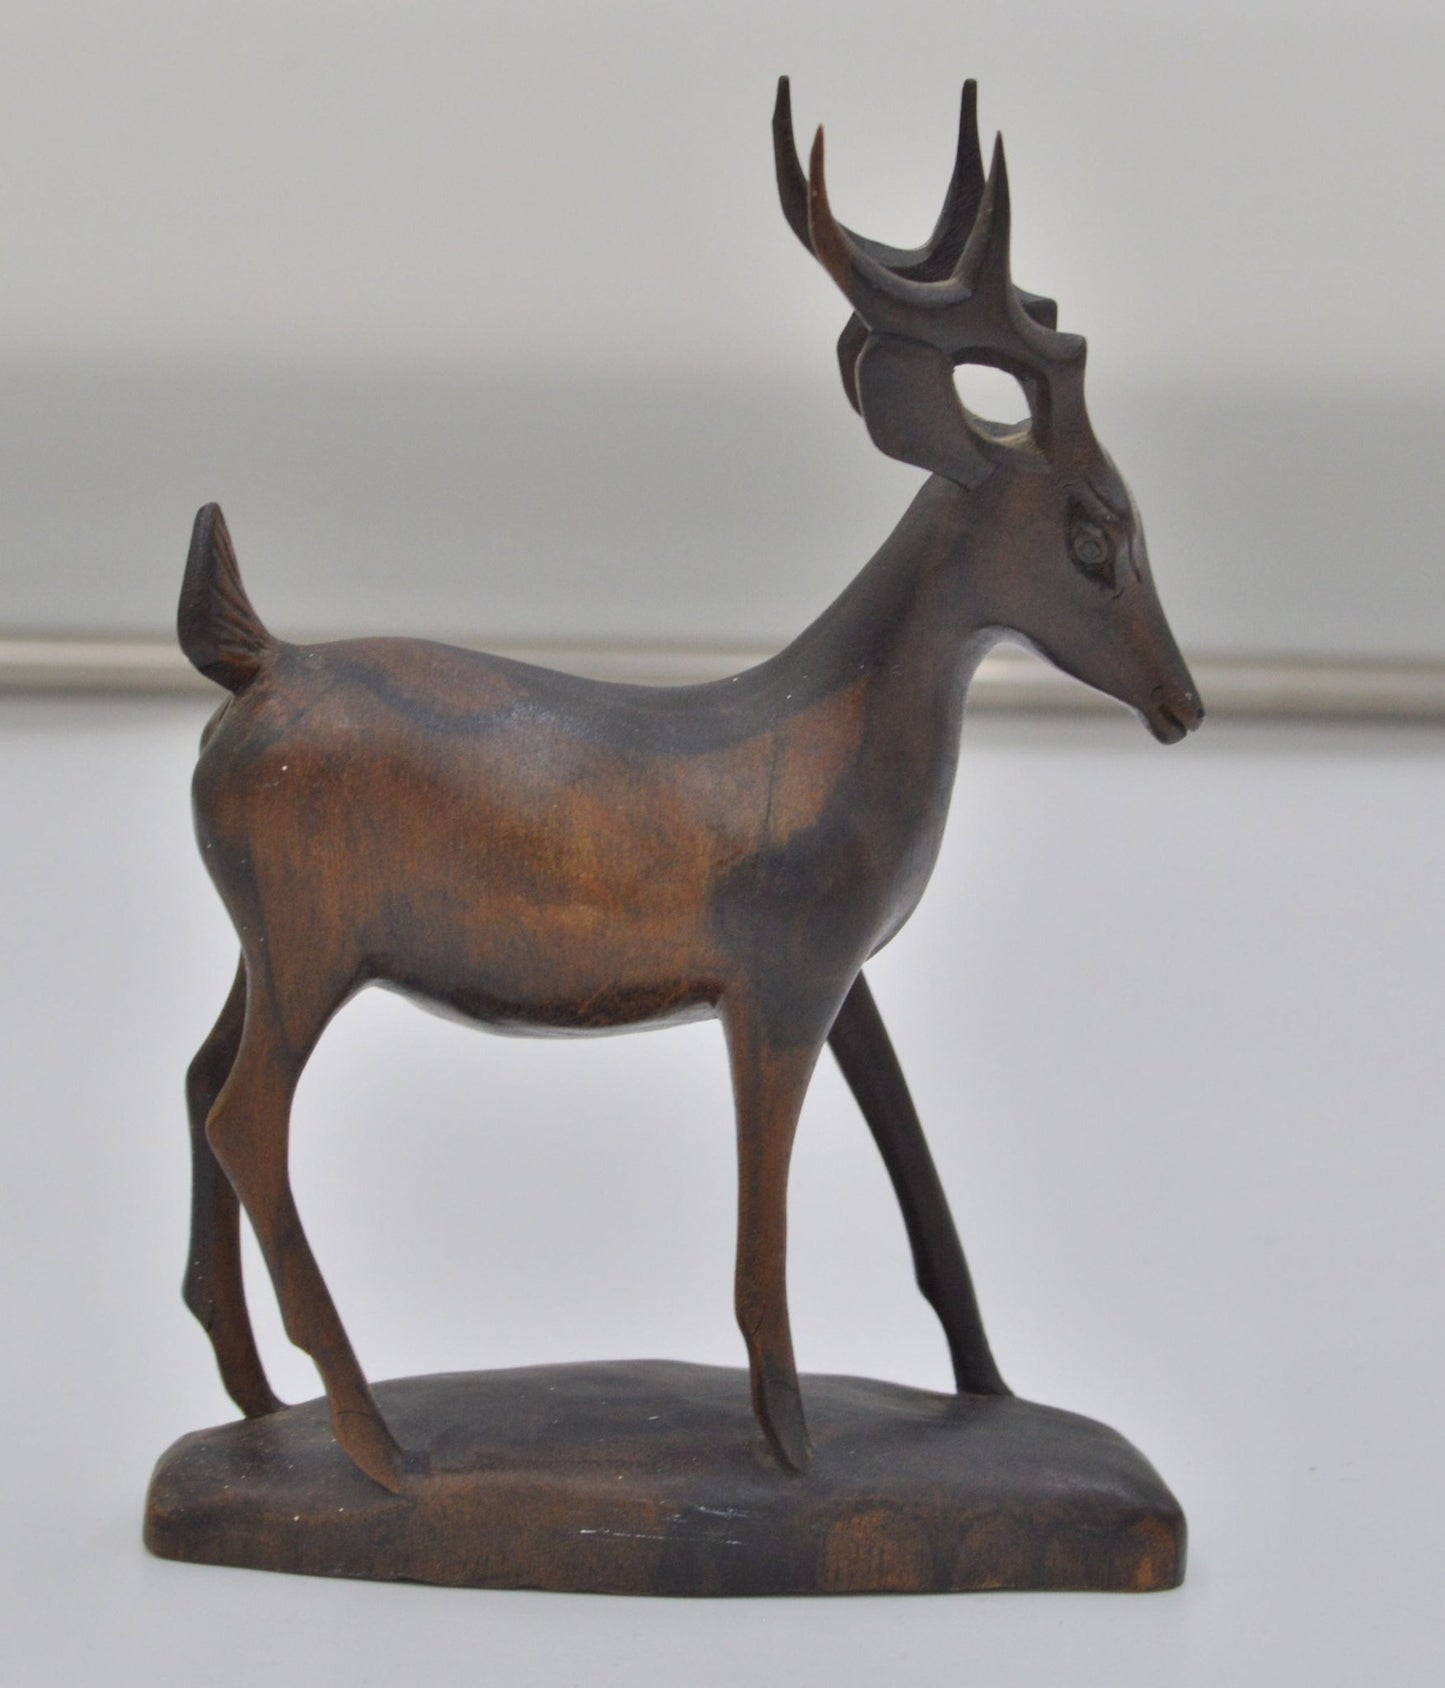 DECORATIVE DARK WOODEN STAG FIGURINE(PREVIOUSLY OWNED) VERY GOOD CONDITION - TMD167207